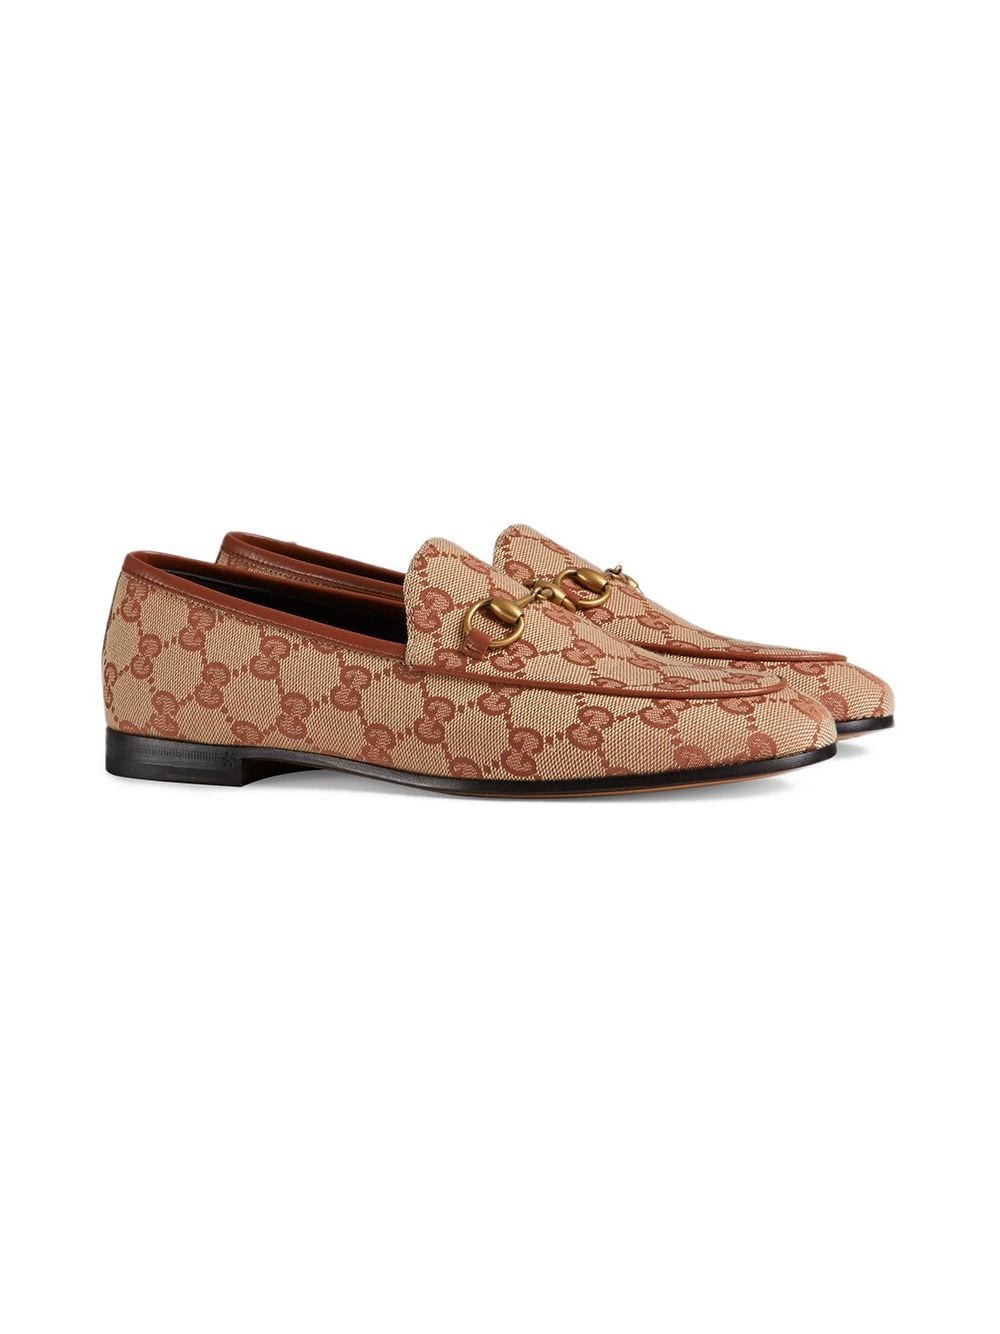 gucci GG PRINT LOAFERS available on 